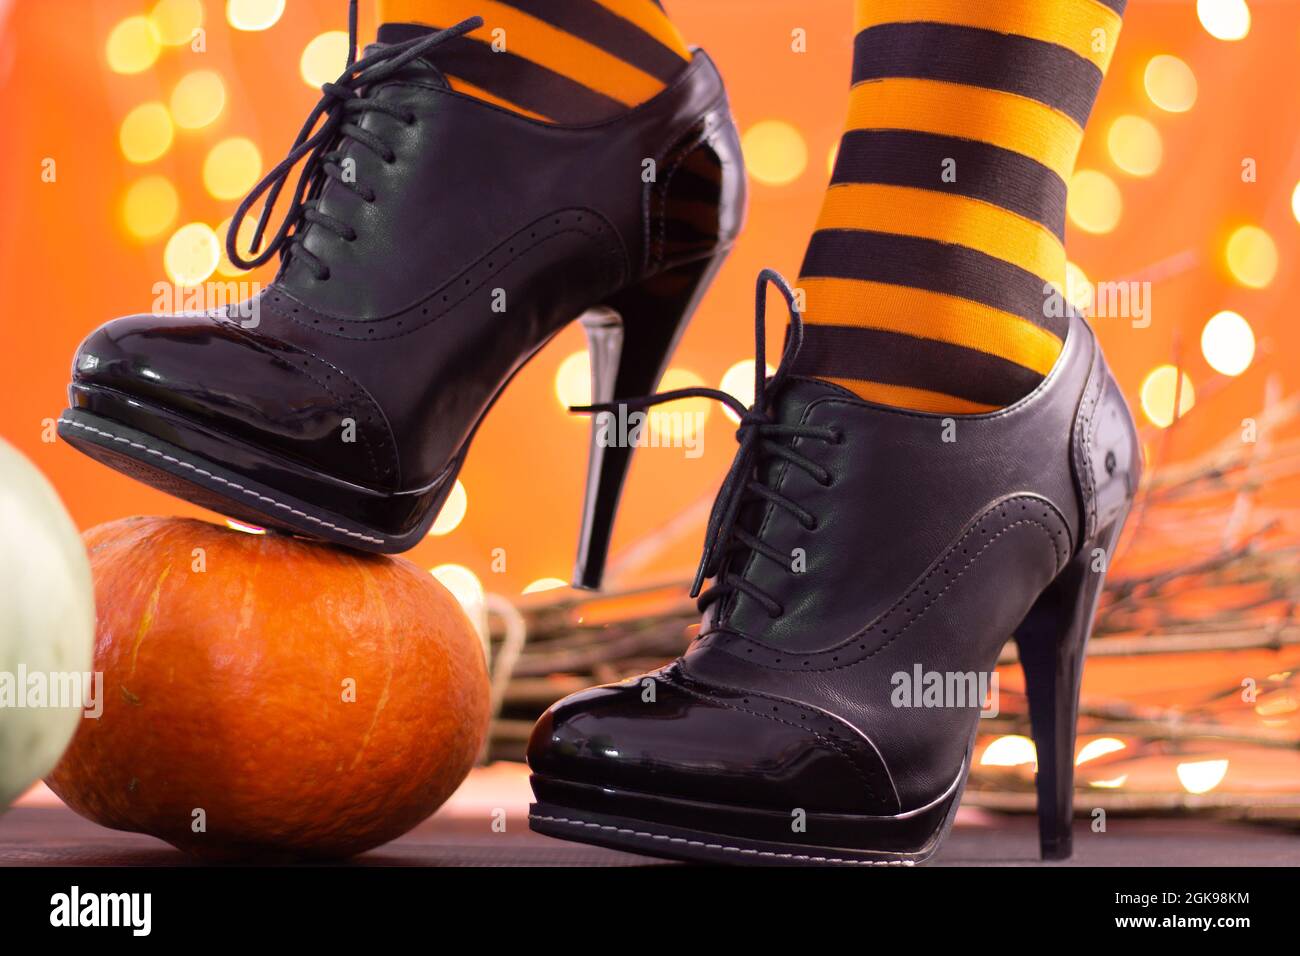 Witch legs in striped stockings and high heel shoes with Halloween pumpkins on an orange background with bokeh. Copy space. Stock Photo